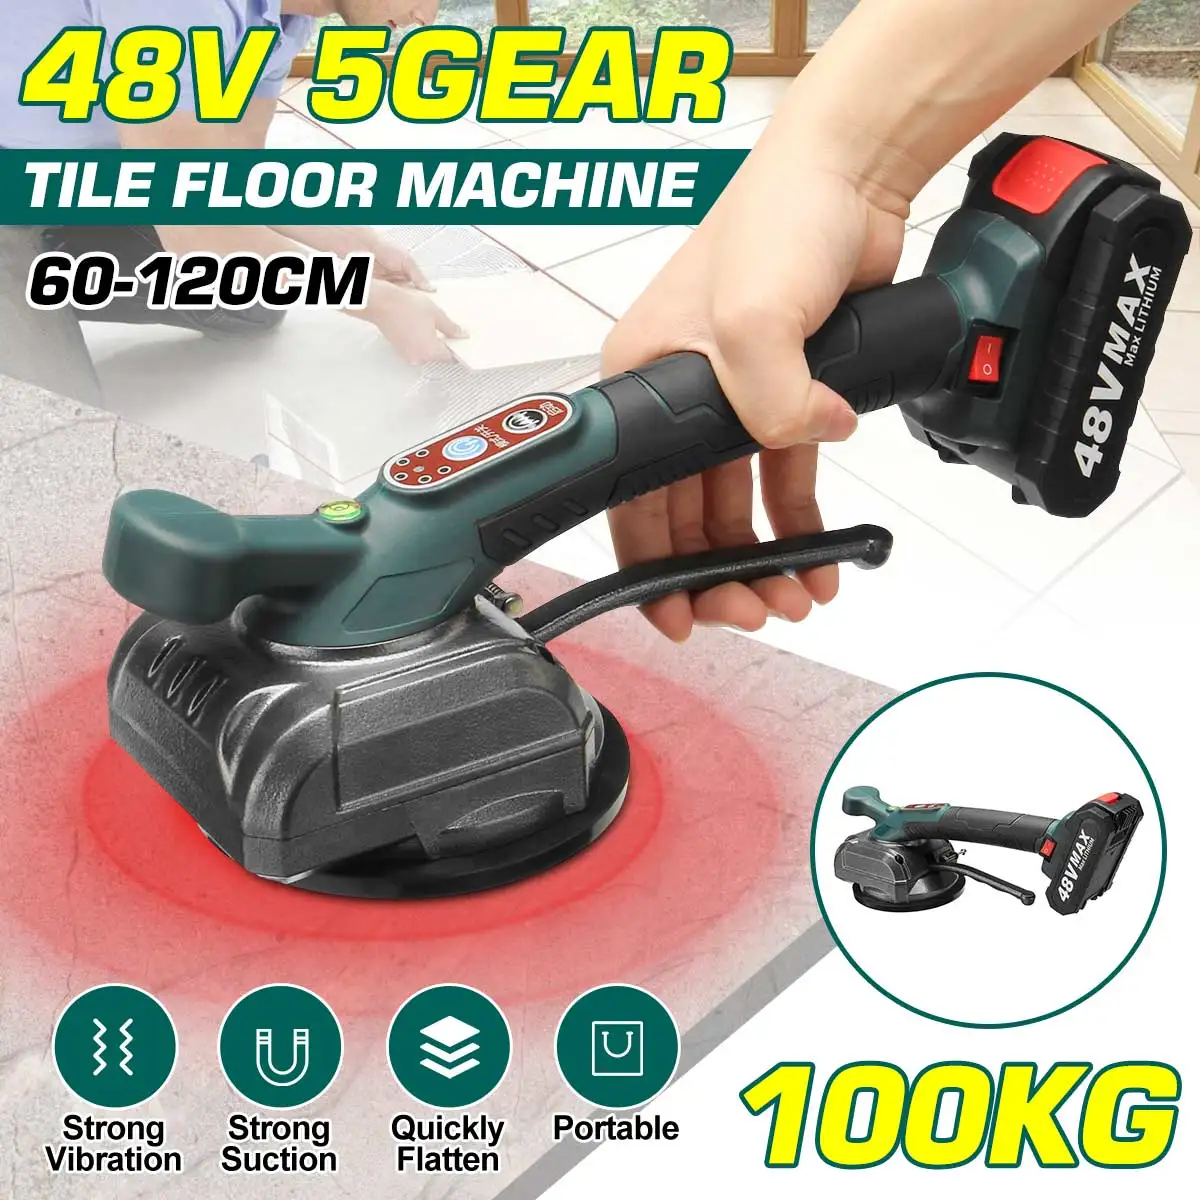 2000W 48V 5 Speed Tiles Tiling Machine Tile Vibrator Suction Cup Adjustable Automatic Floor Vibrator Leveling Tool With Battery